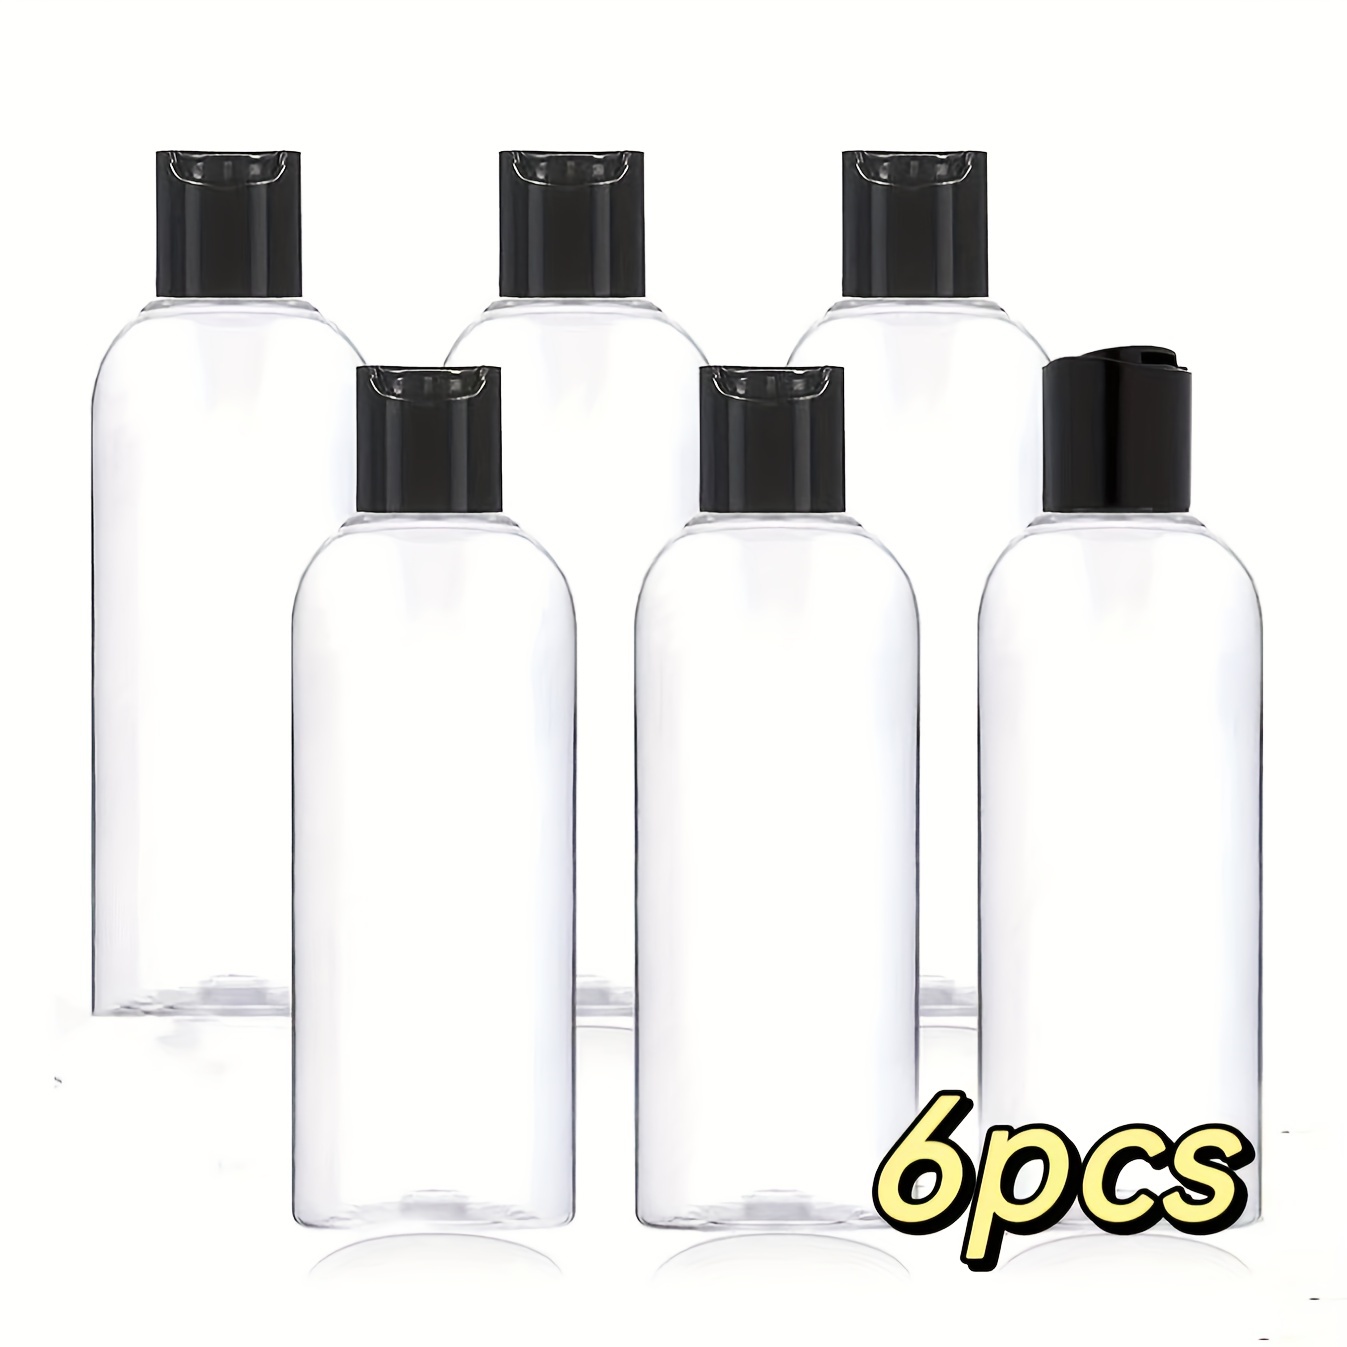 

6pcs, 3.4 Oz Clear Empty Travel Bottles With Disc Cap, 100ml Tsa Transparent Plastic Travel Size Bottles And Refillable Travel Containers For Shampoo And Lotion